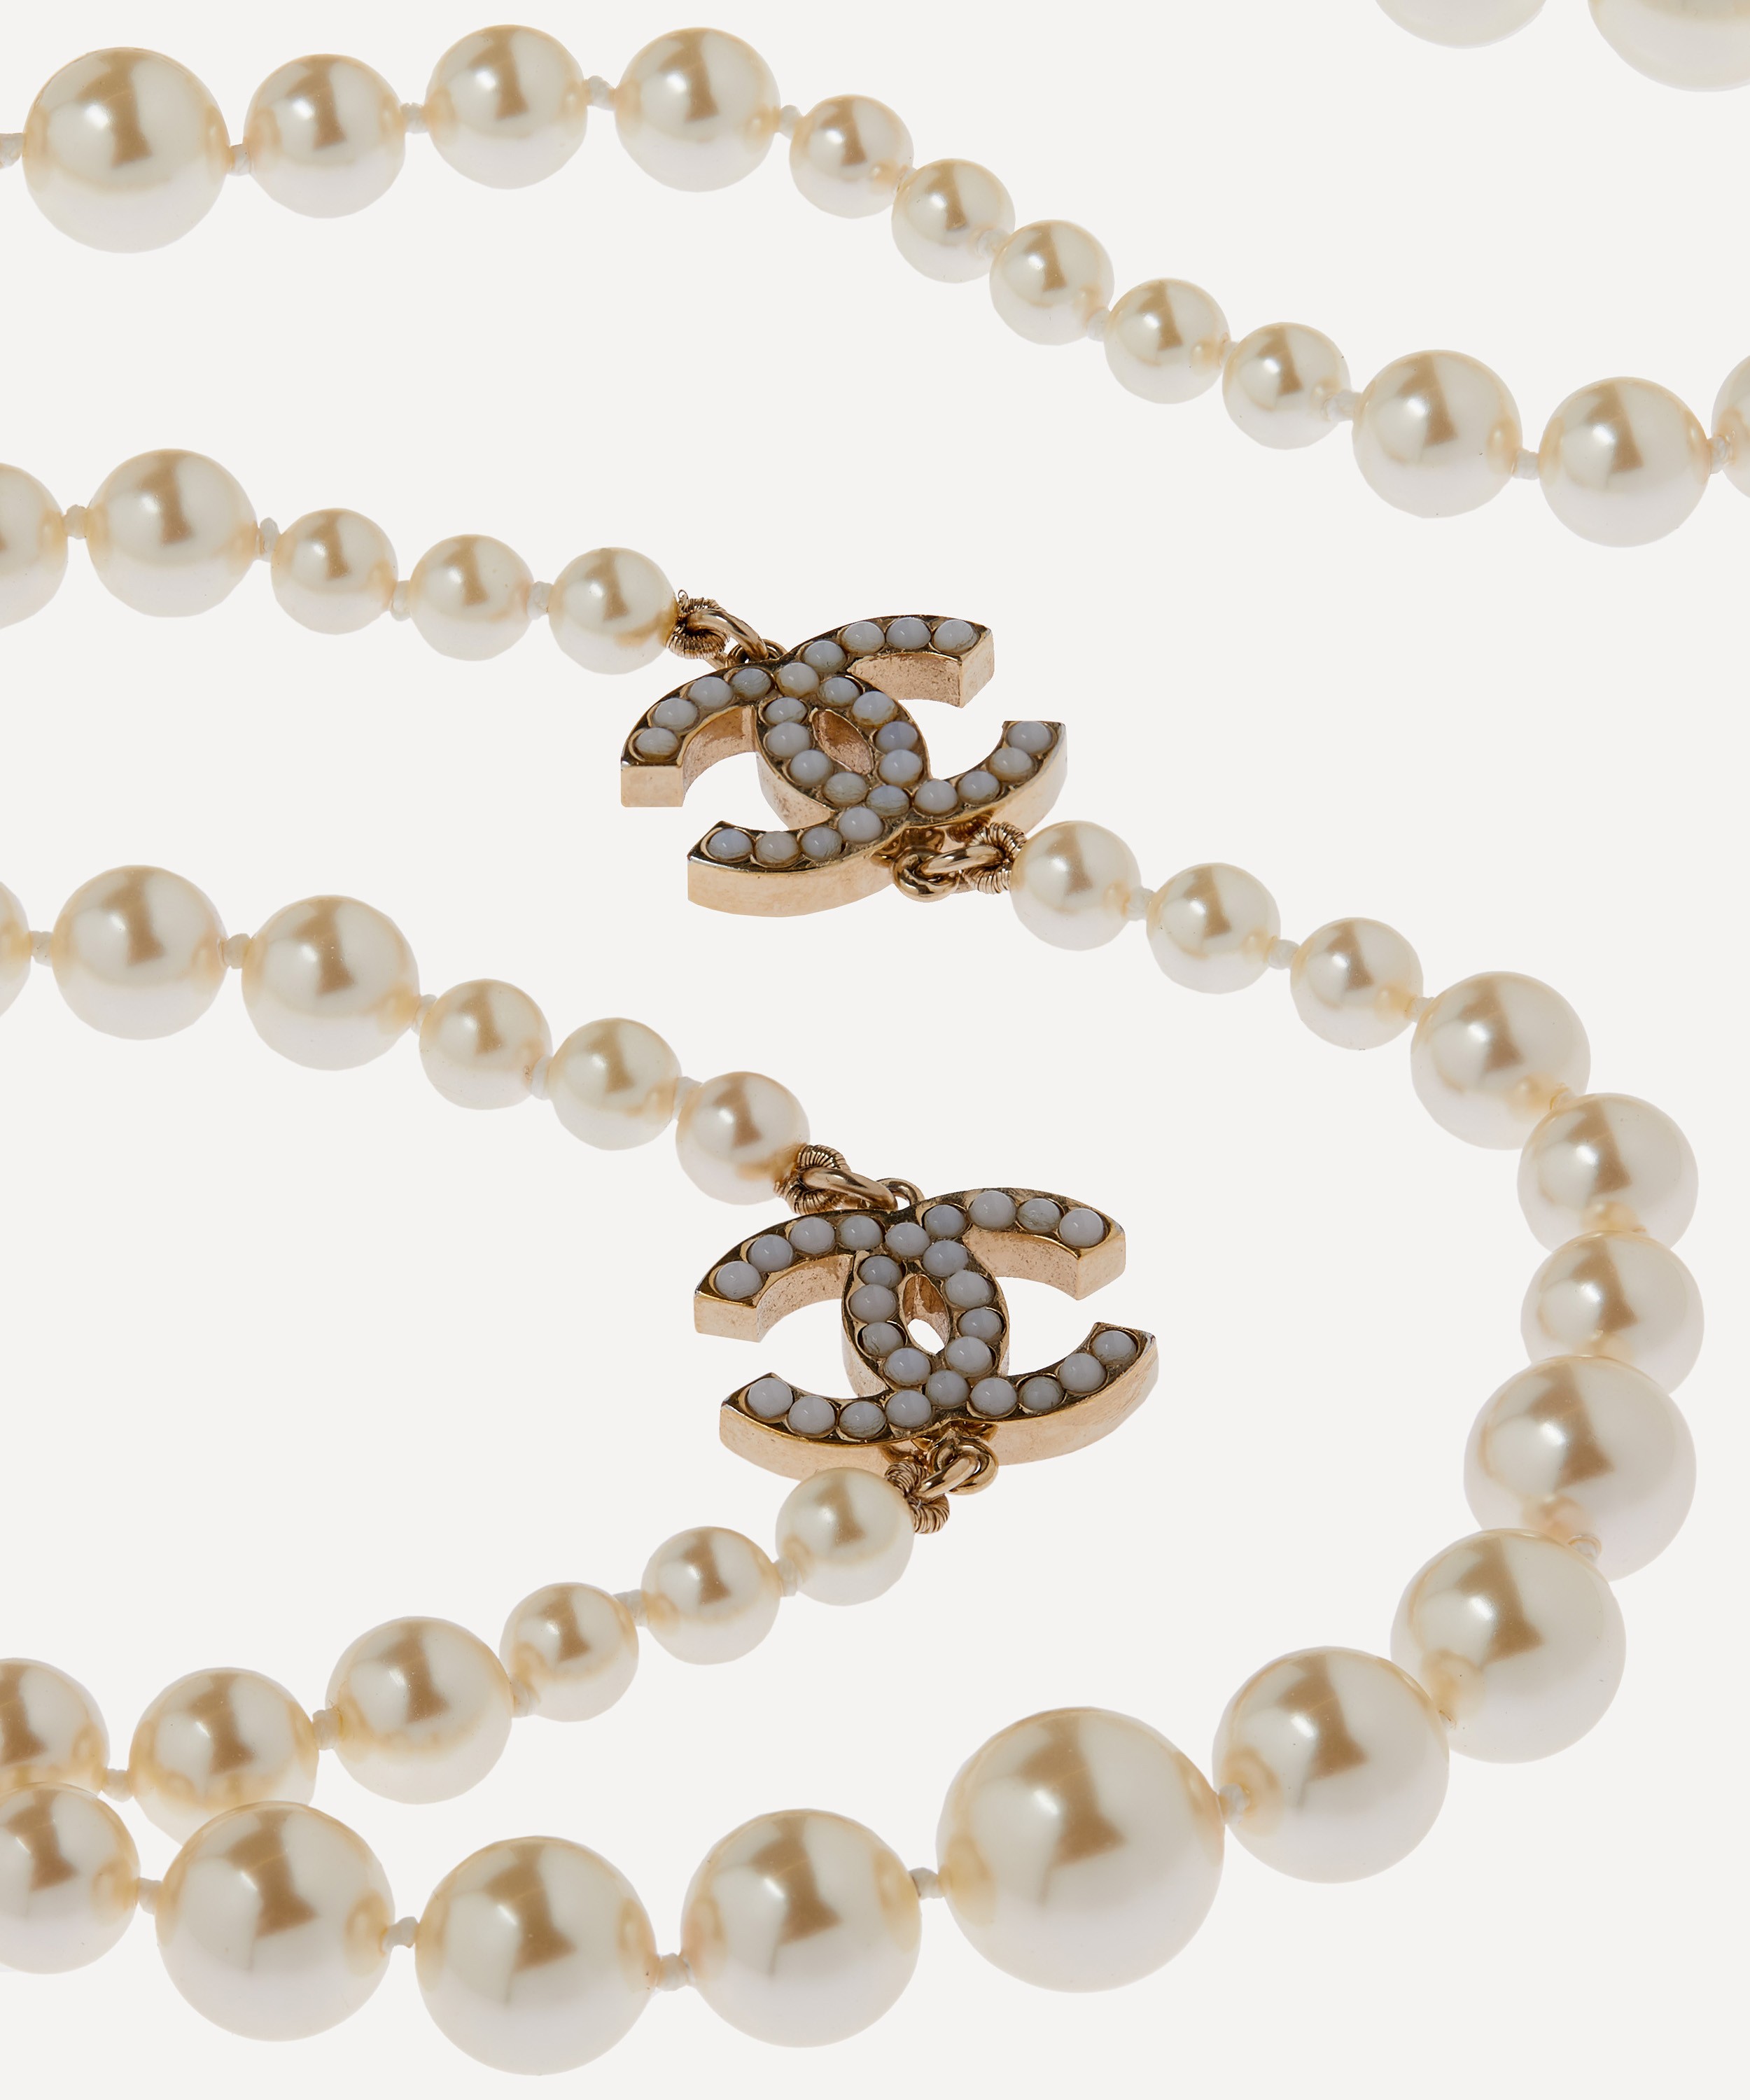 Costume Jewelry Pearls: History and how Chanel made them fashionable